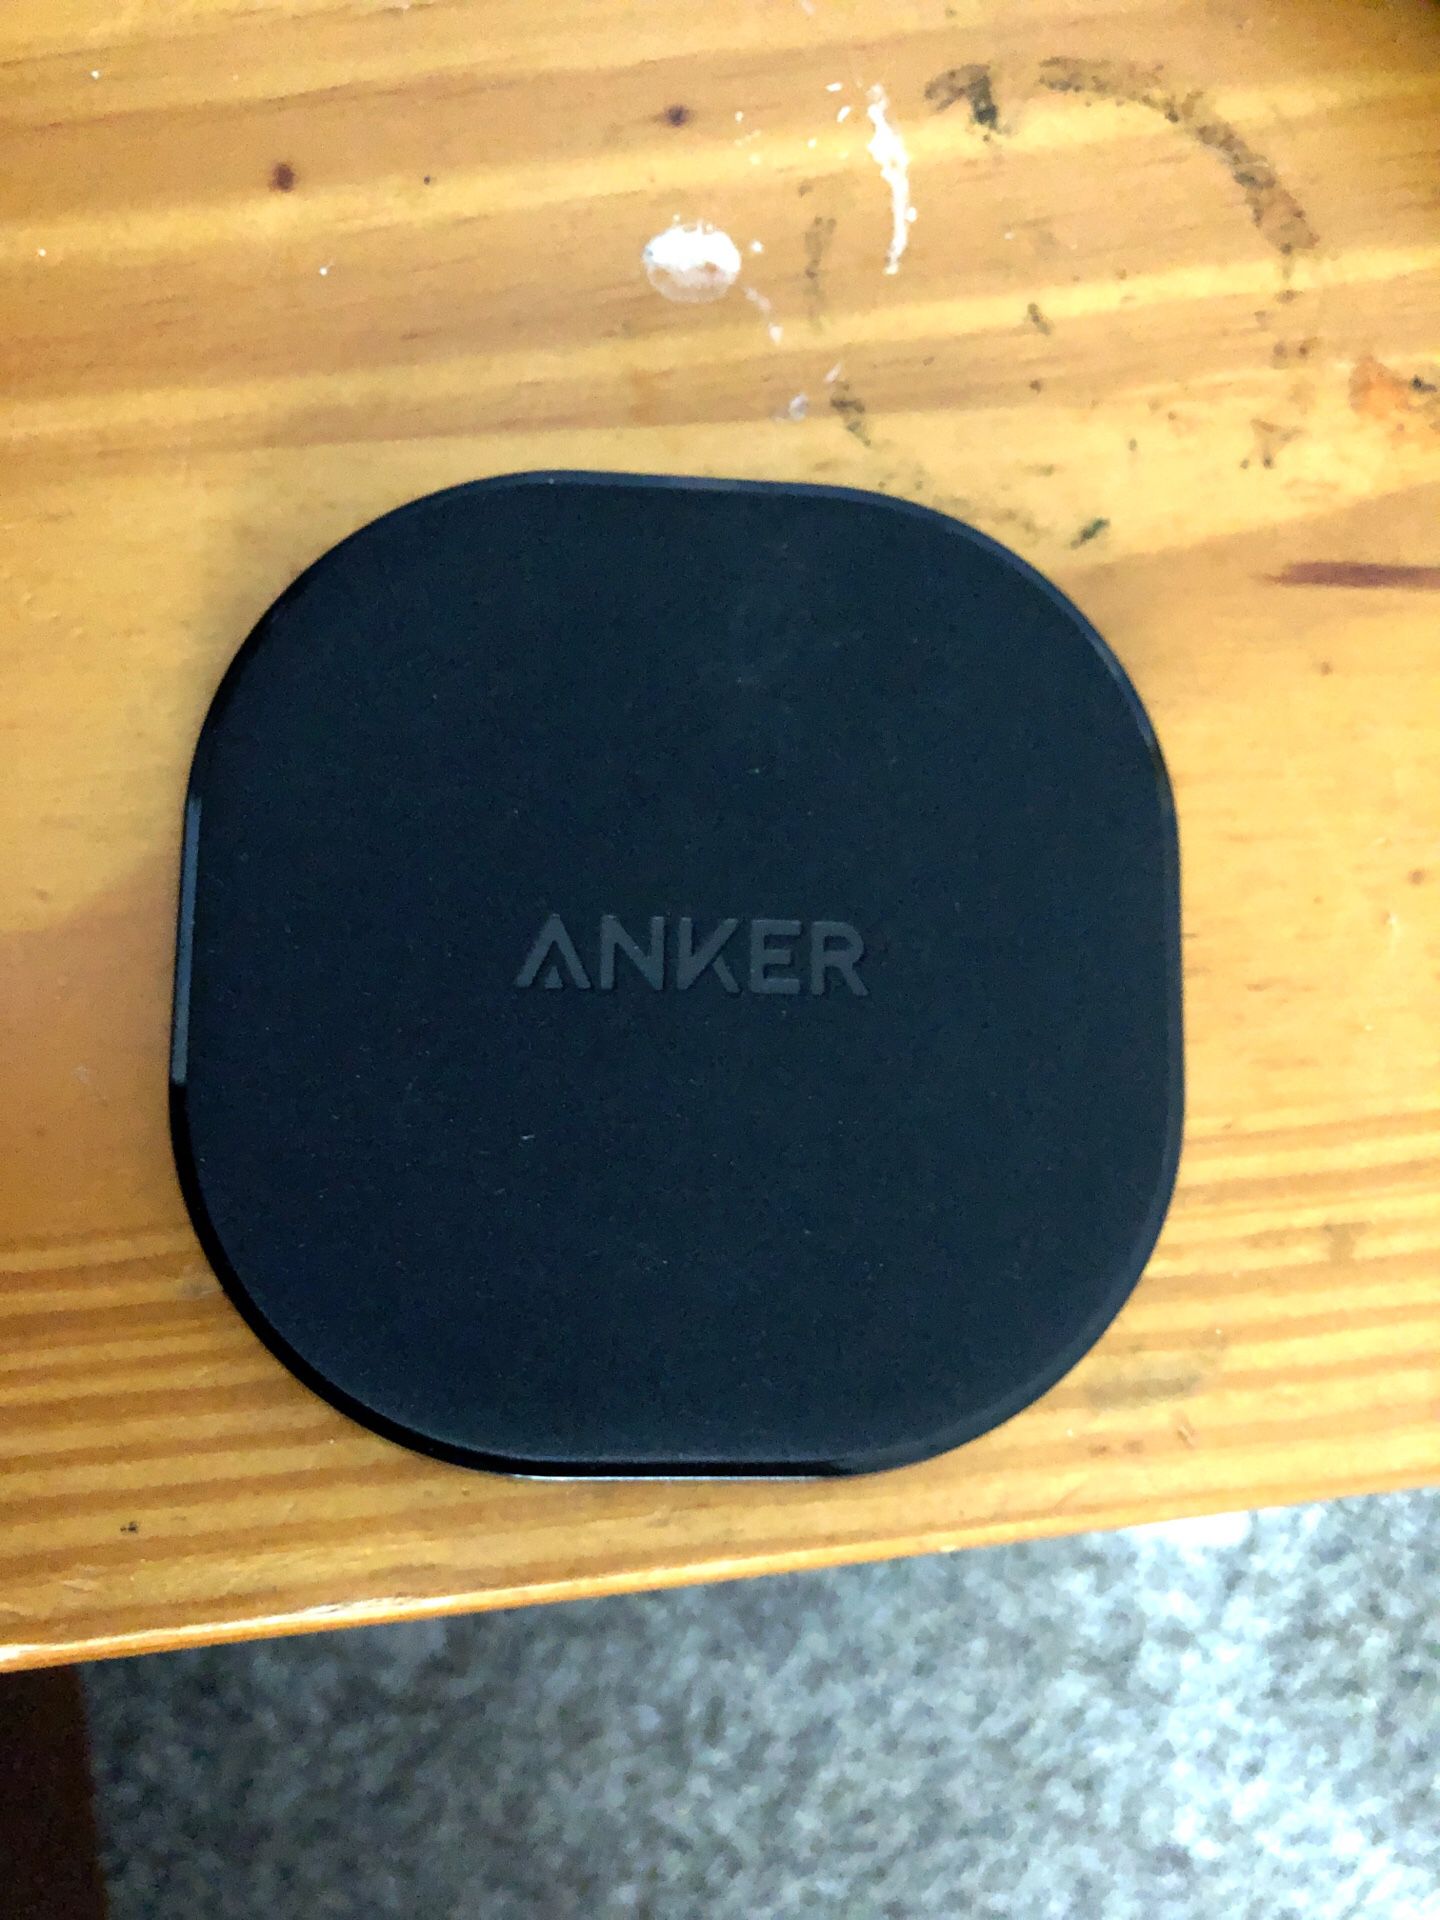 Anker Powerport 10 Wireless phone charger